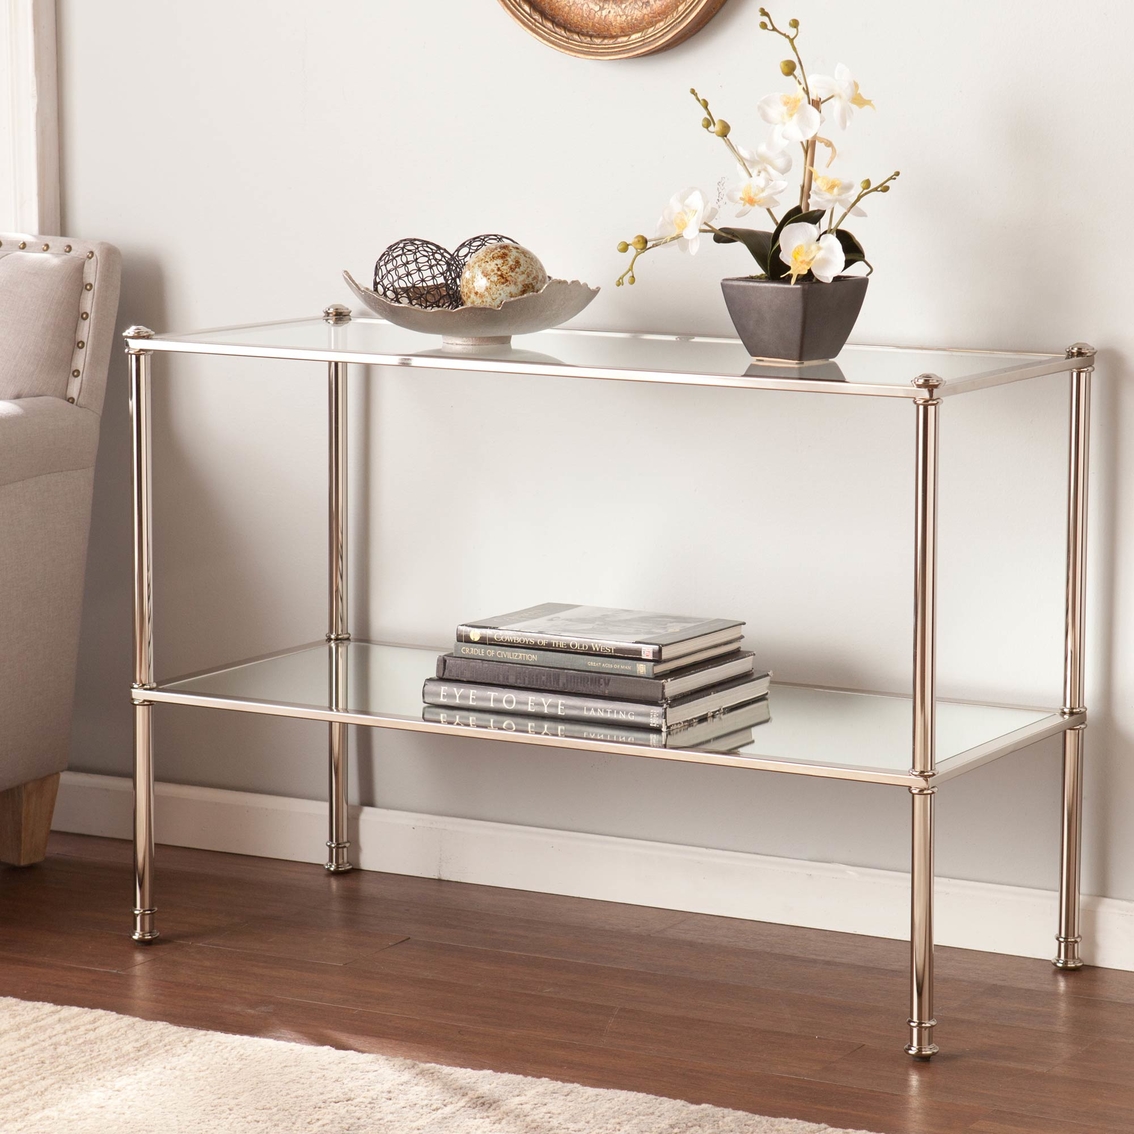 Southern Enterprises Paschall Console Table - Image 2 of 2